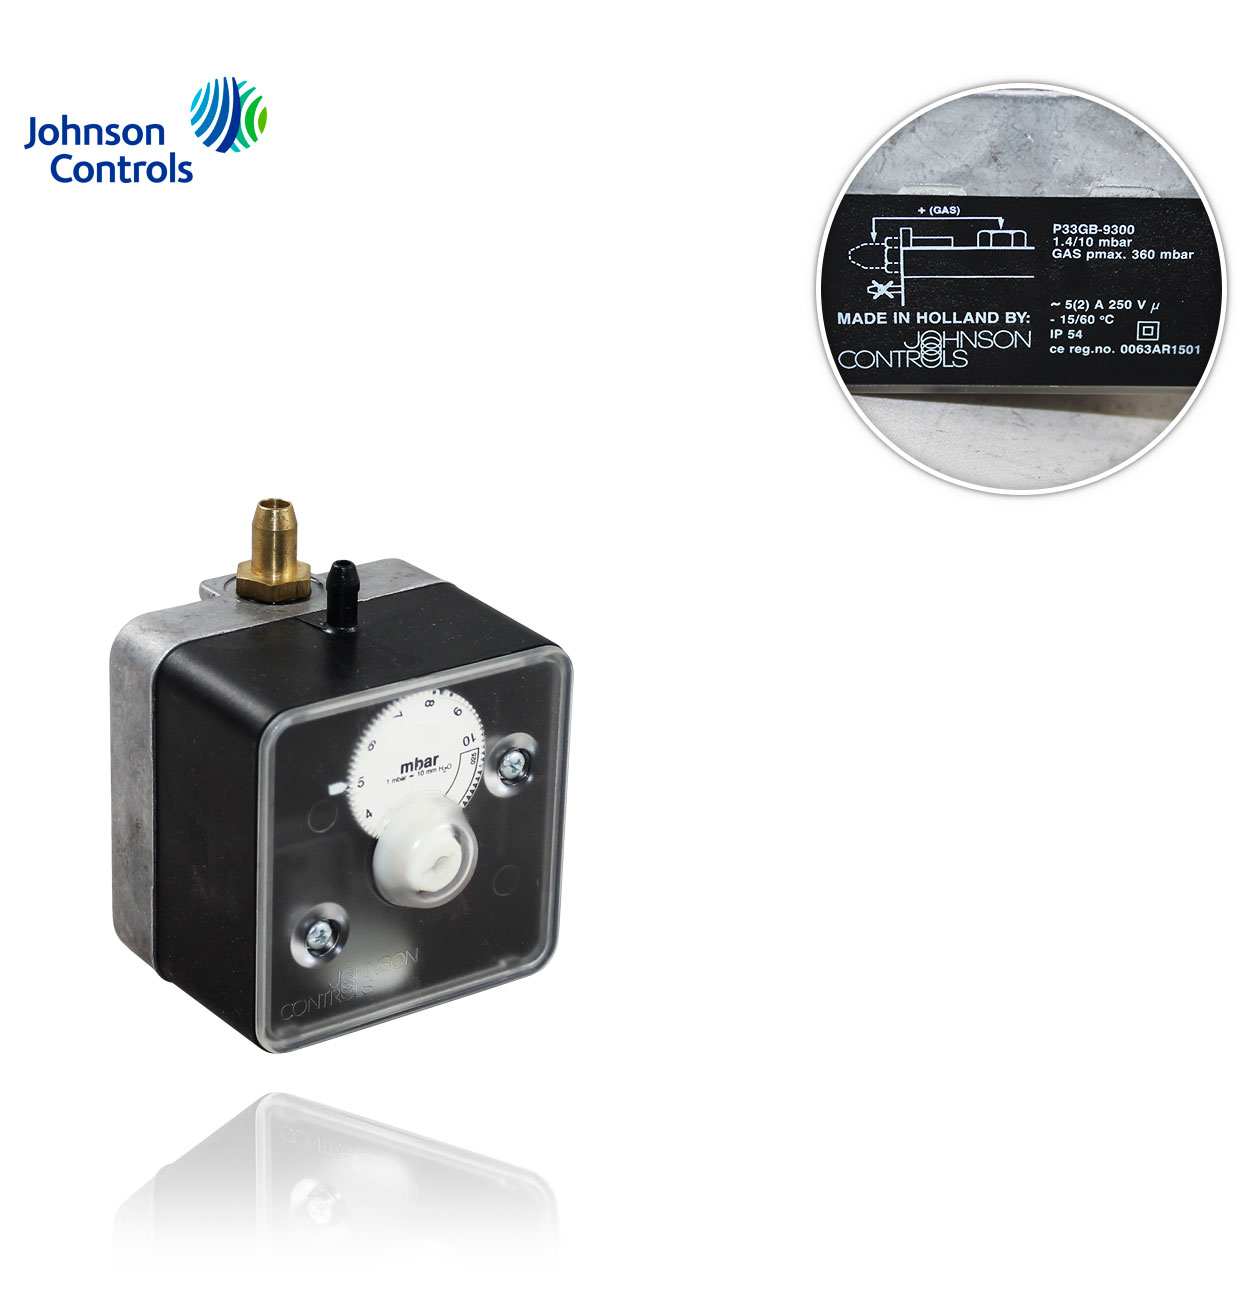 DIFFERENTIAL GAS PRESSURE SWITCH P33 GB 9300  1.4-10mbar.